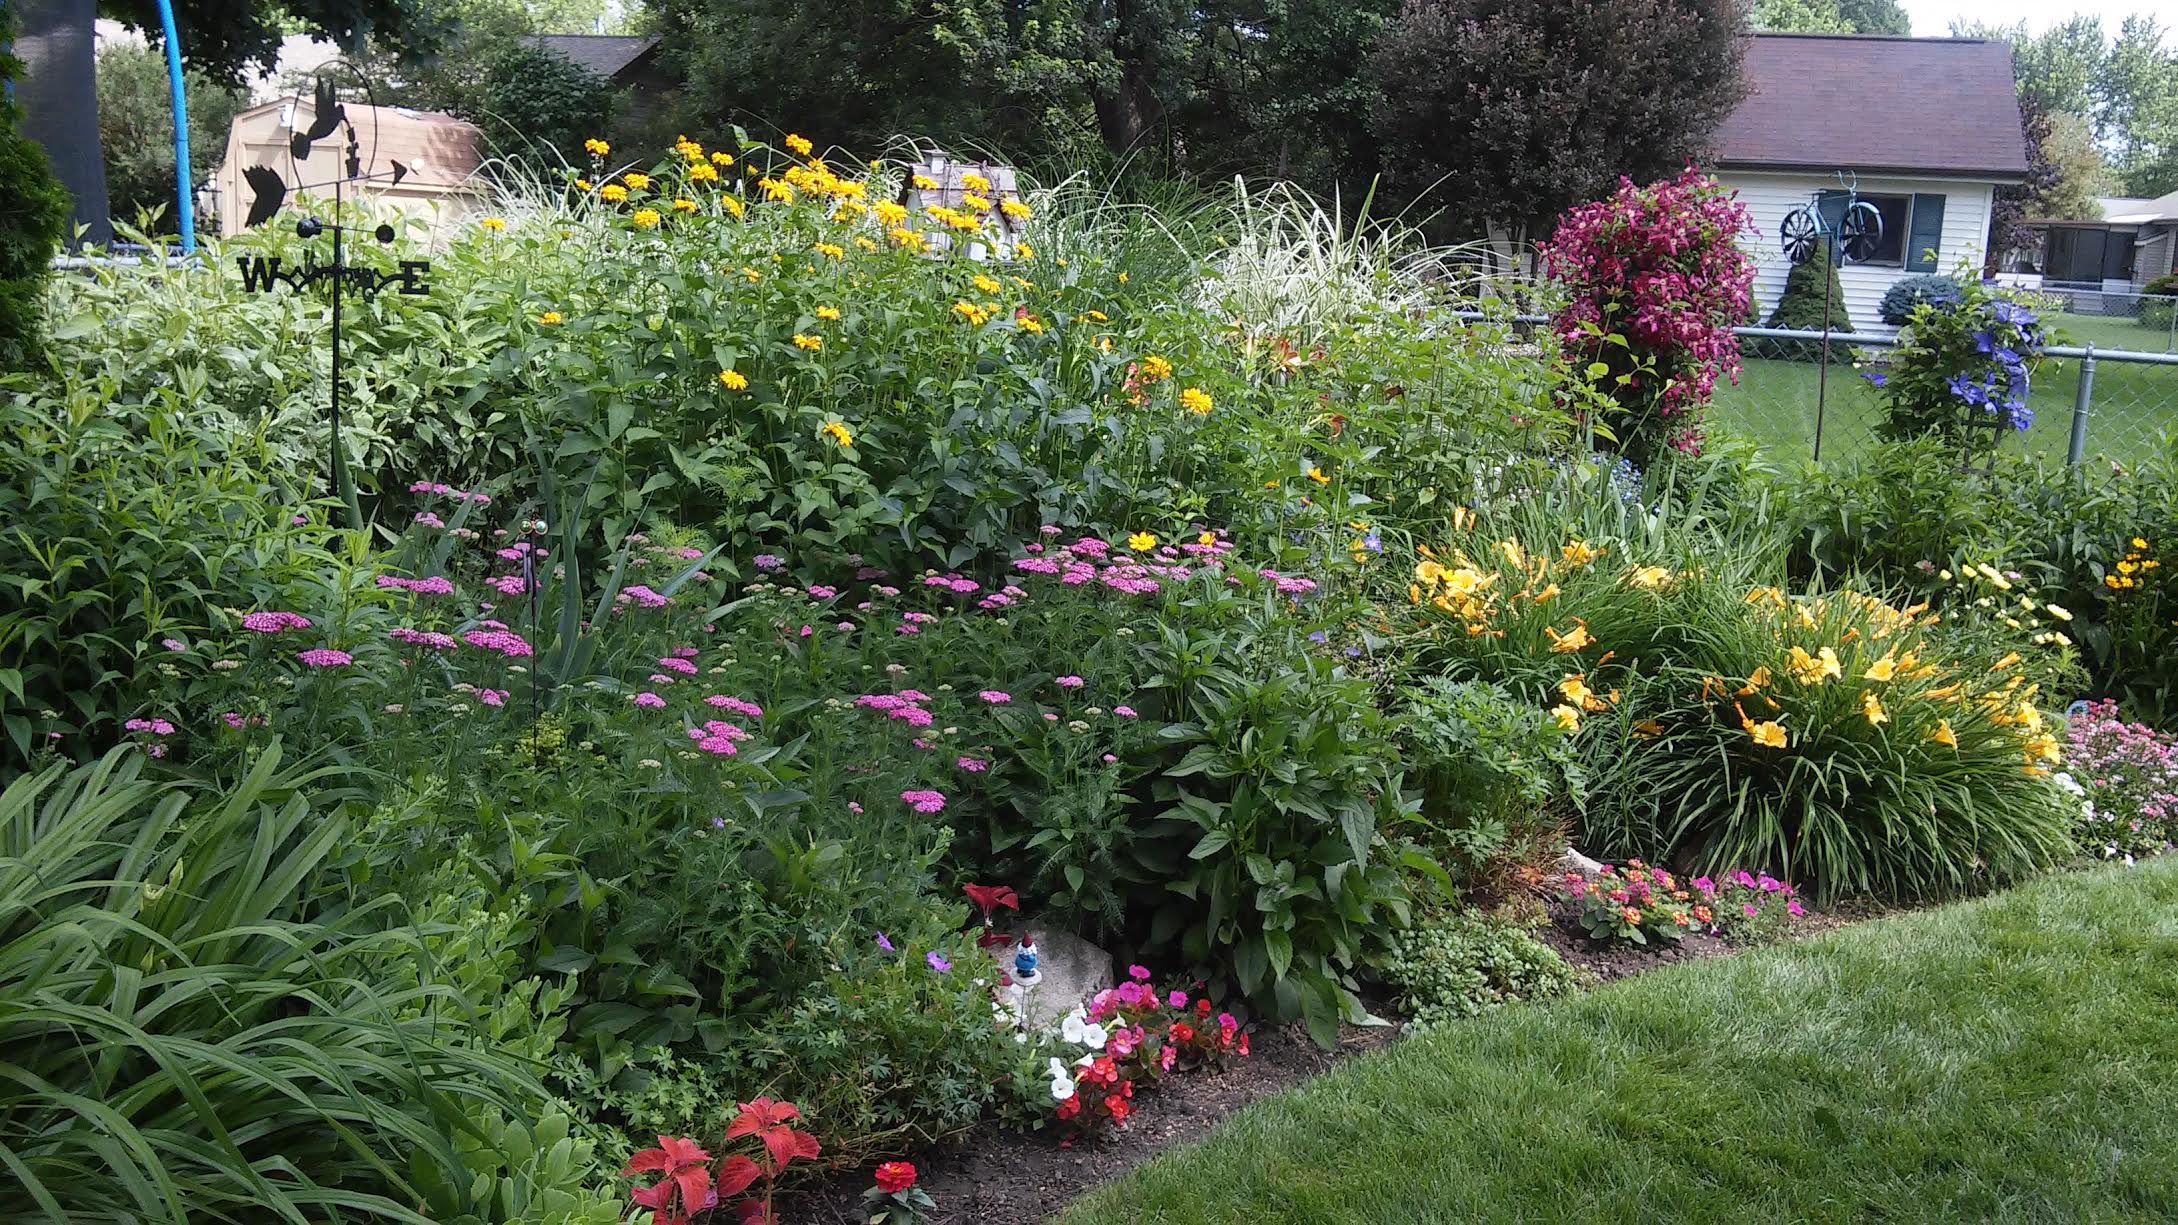 A flower bed with lots of colorful flowers next to a lawn